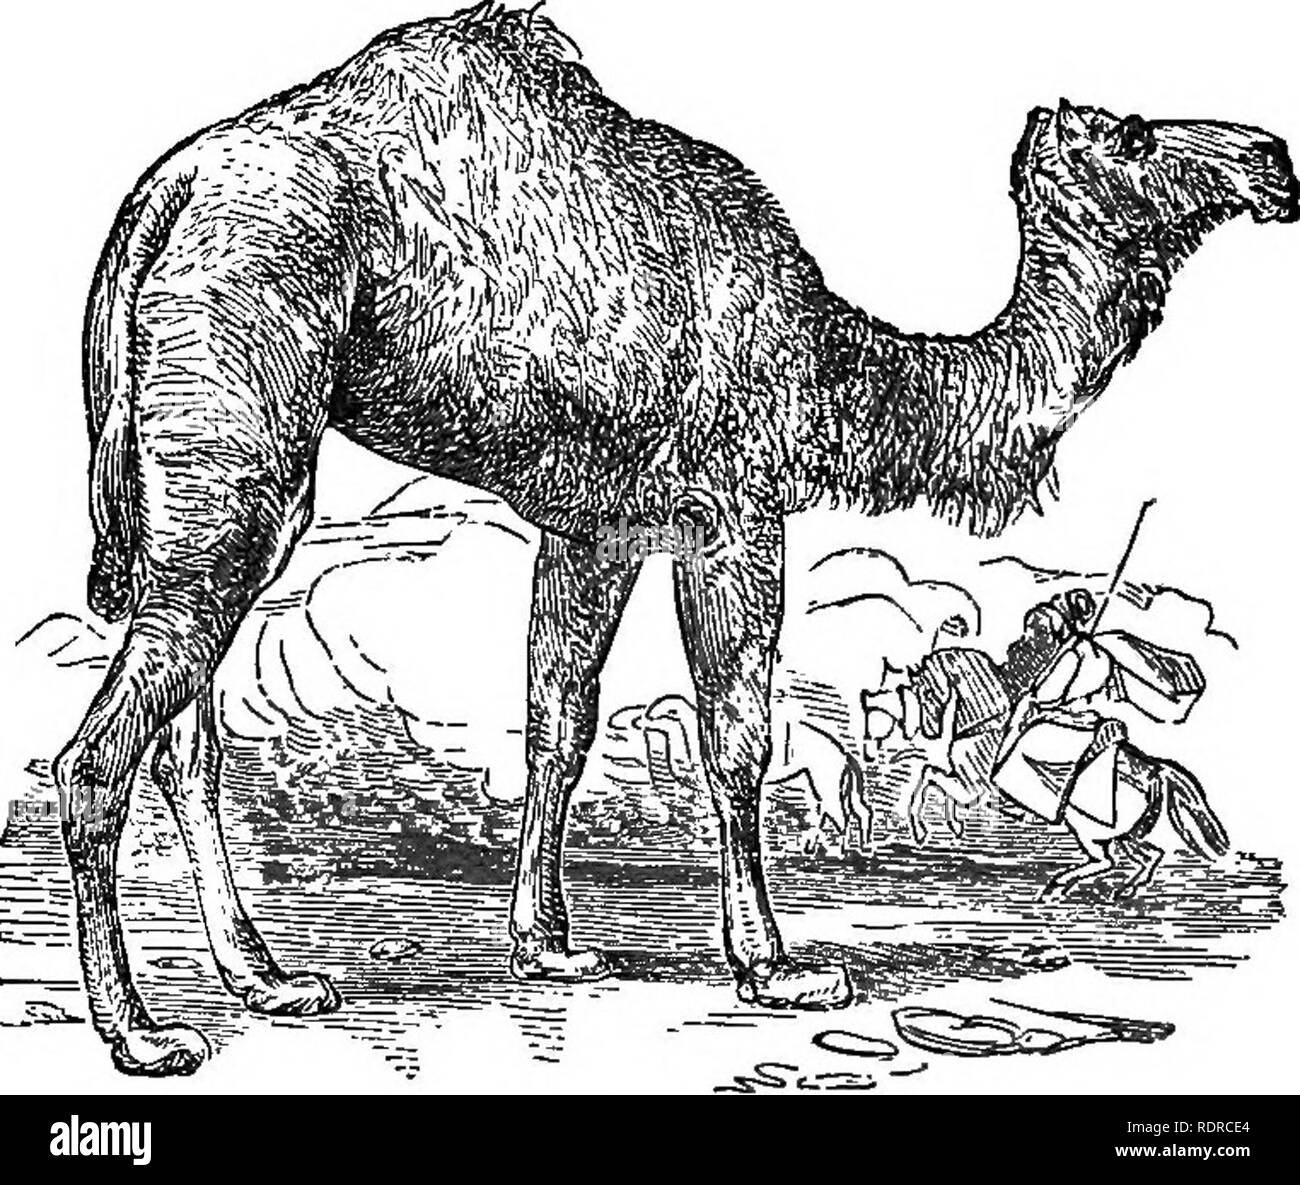 . Natural history. For the use of schools and families. Zoology. 104 NATUEAL HISTORY.. Fig. 89 ^The Arabian CameL I'll. The Arabian Camel has been called very appro- priately &quot; the ship of the desert.&quot; It is especially fitted in many respects for traveling across the wide deserts in that quarter of the 'world. Its broad elastic cushions on its feet afibrd it a firm footing on the sand. The callous surfaces on its chest and limbs defend it from the heat of the sand as it takes its rest. The eye is shielded from the glaring light of the sun by a brow hanging over like a roof, and by it Stock Photo